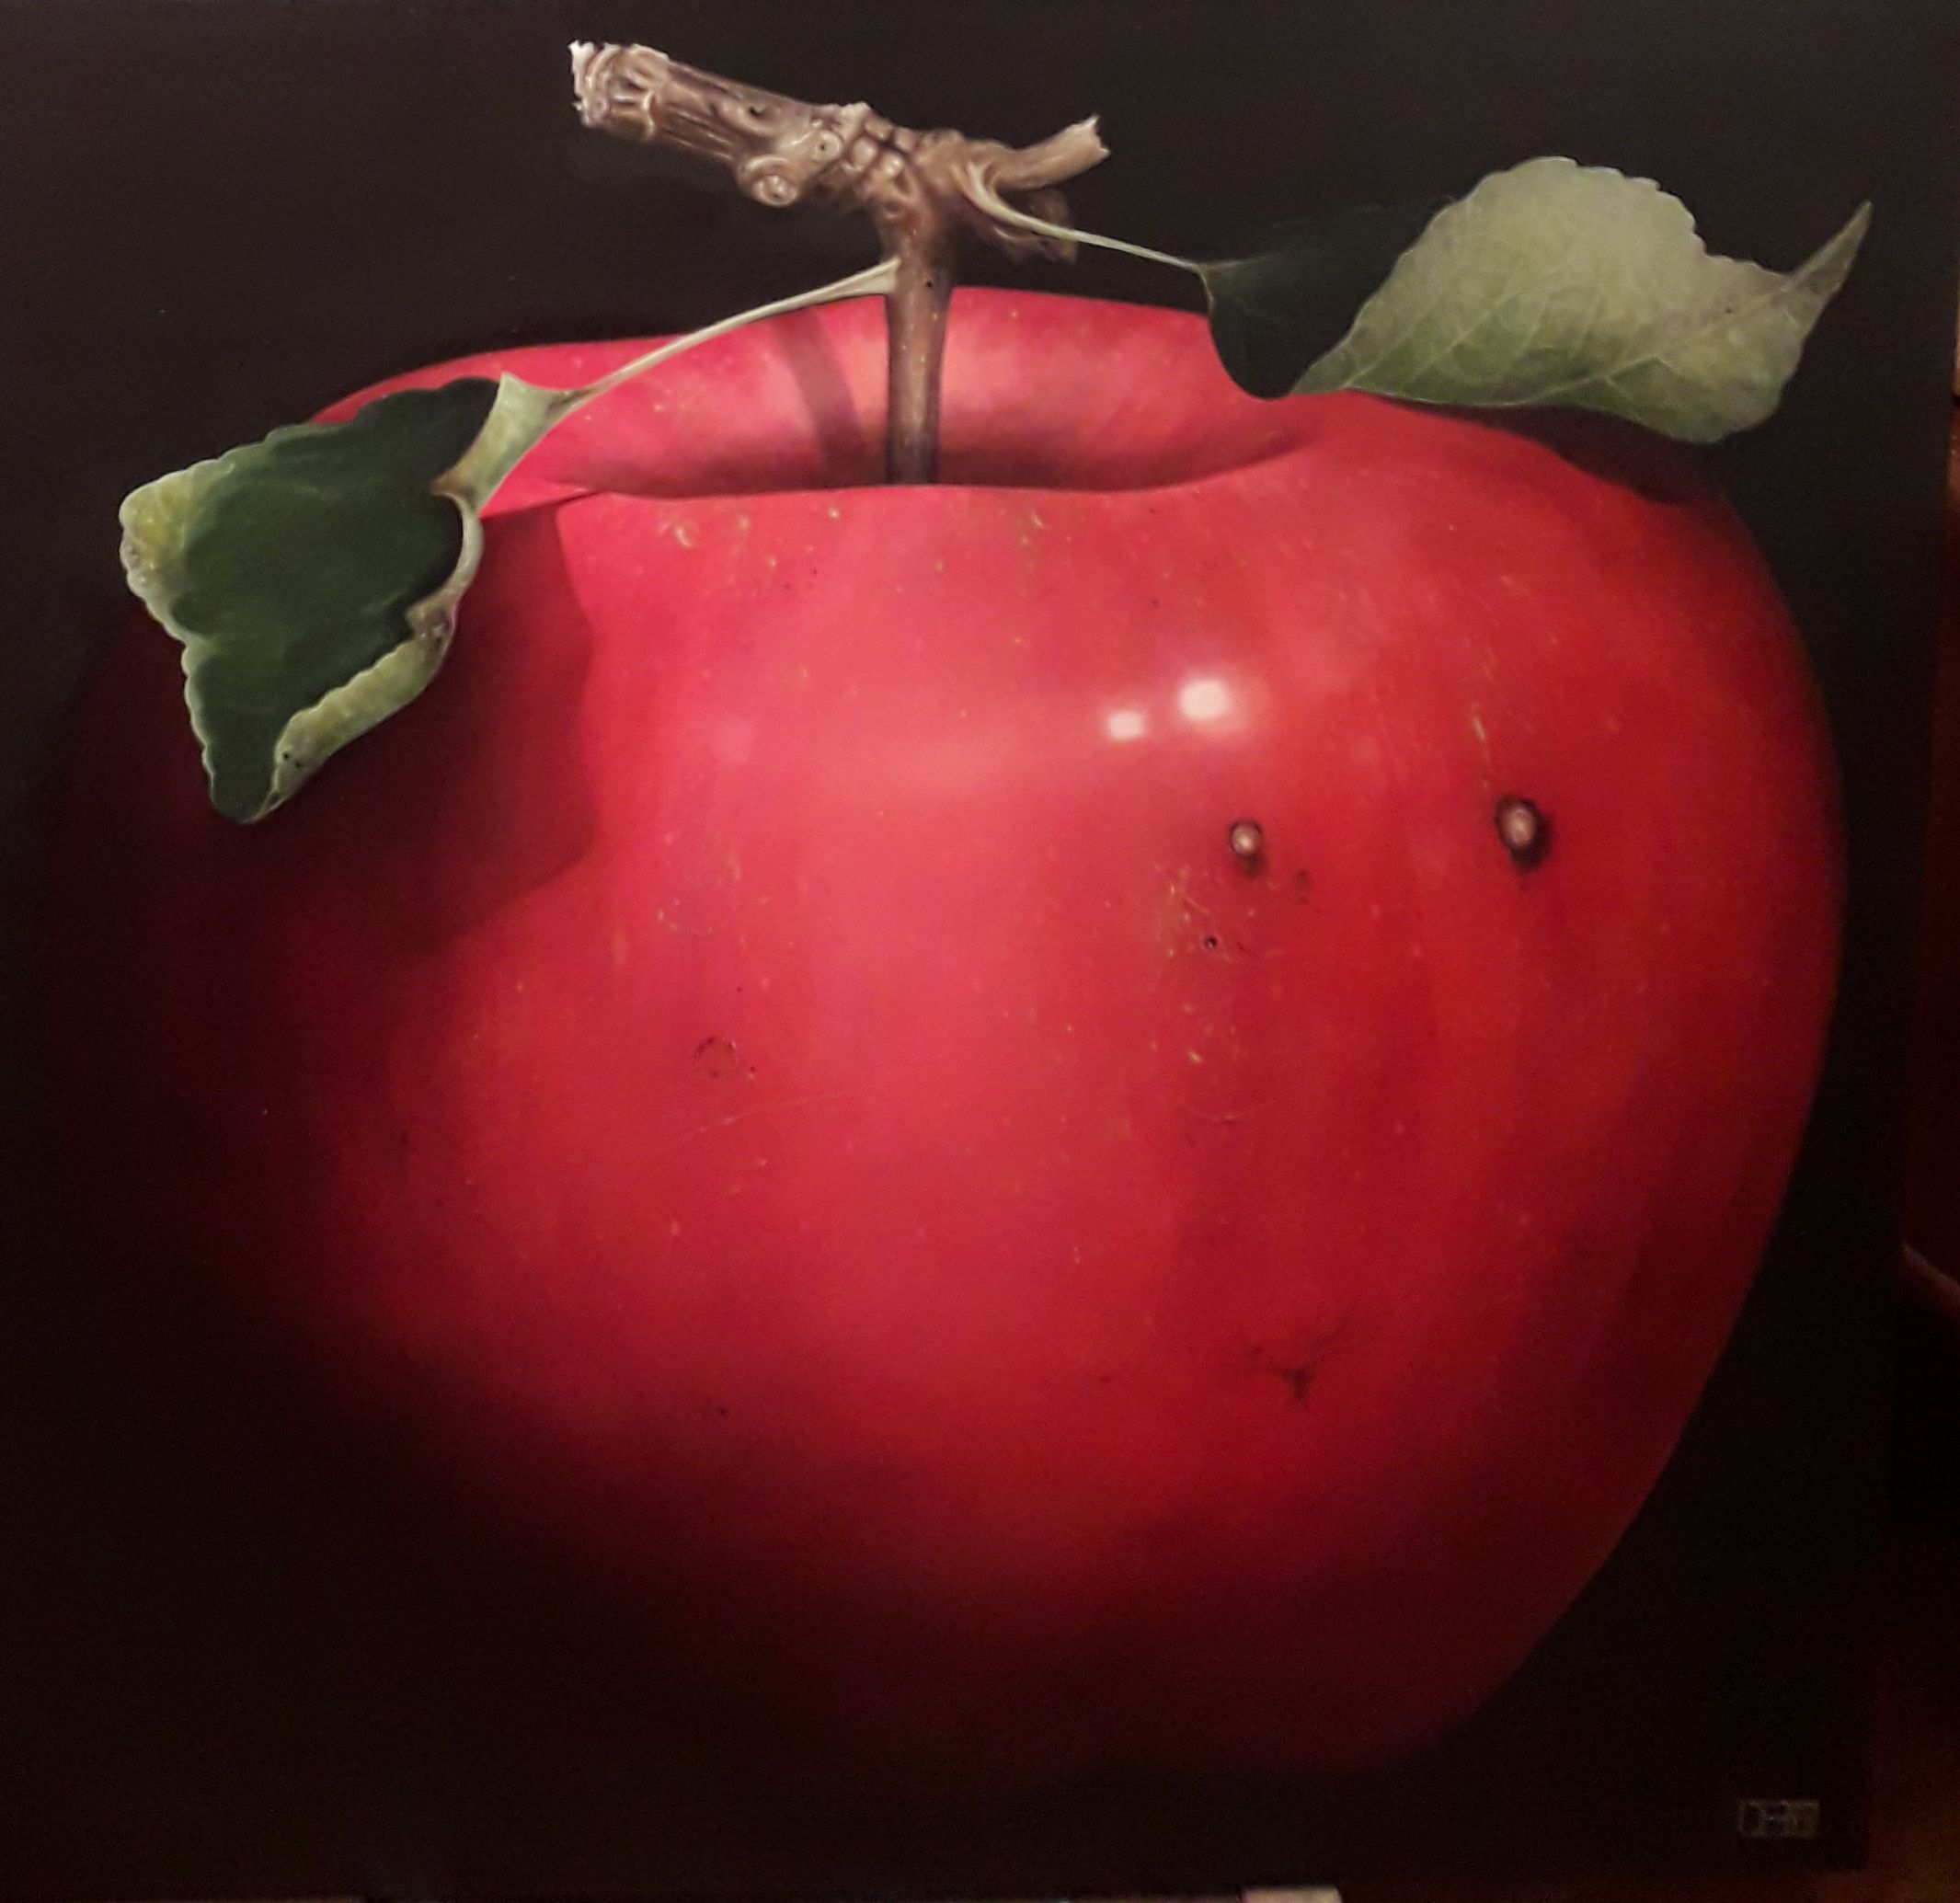 Planet Apple: The Fairest Of Them All by Dani Humberstone